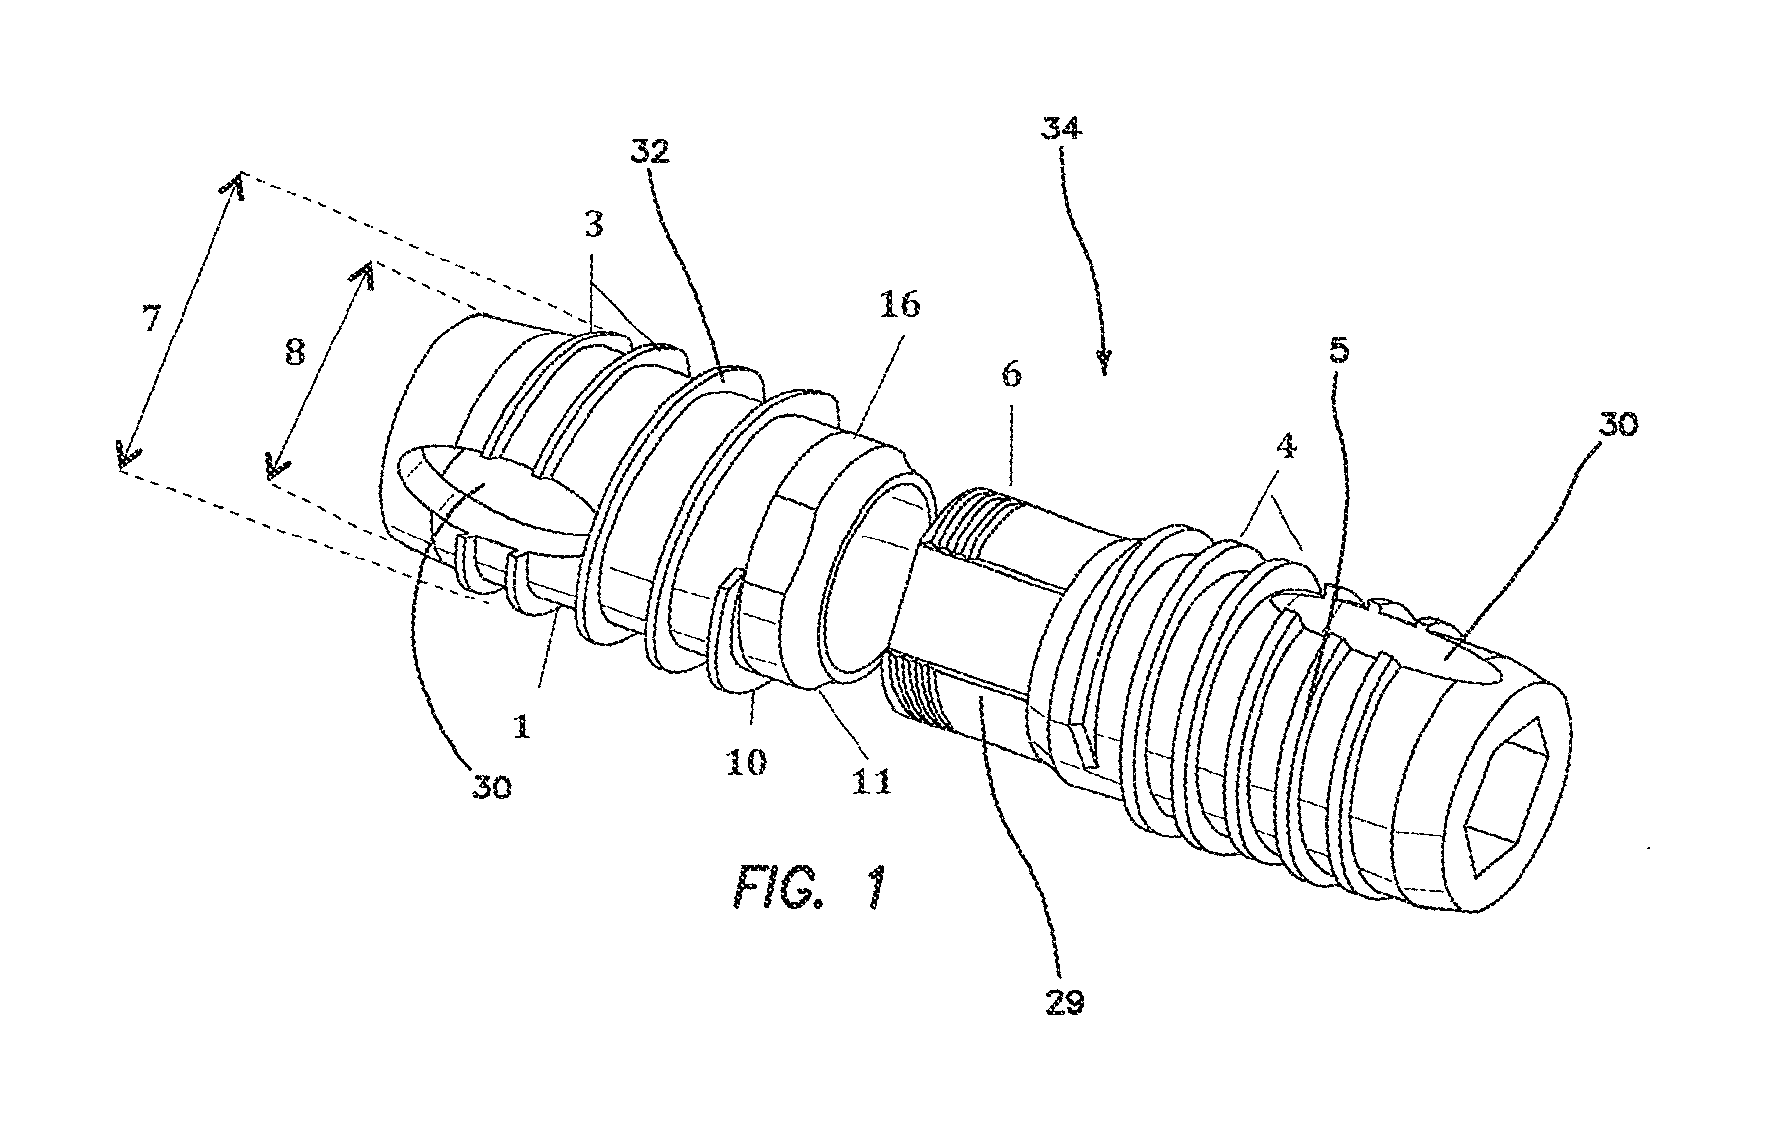 Apparatus and method for use in the treatment of hammertoe